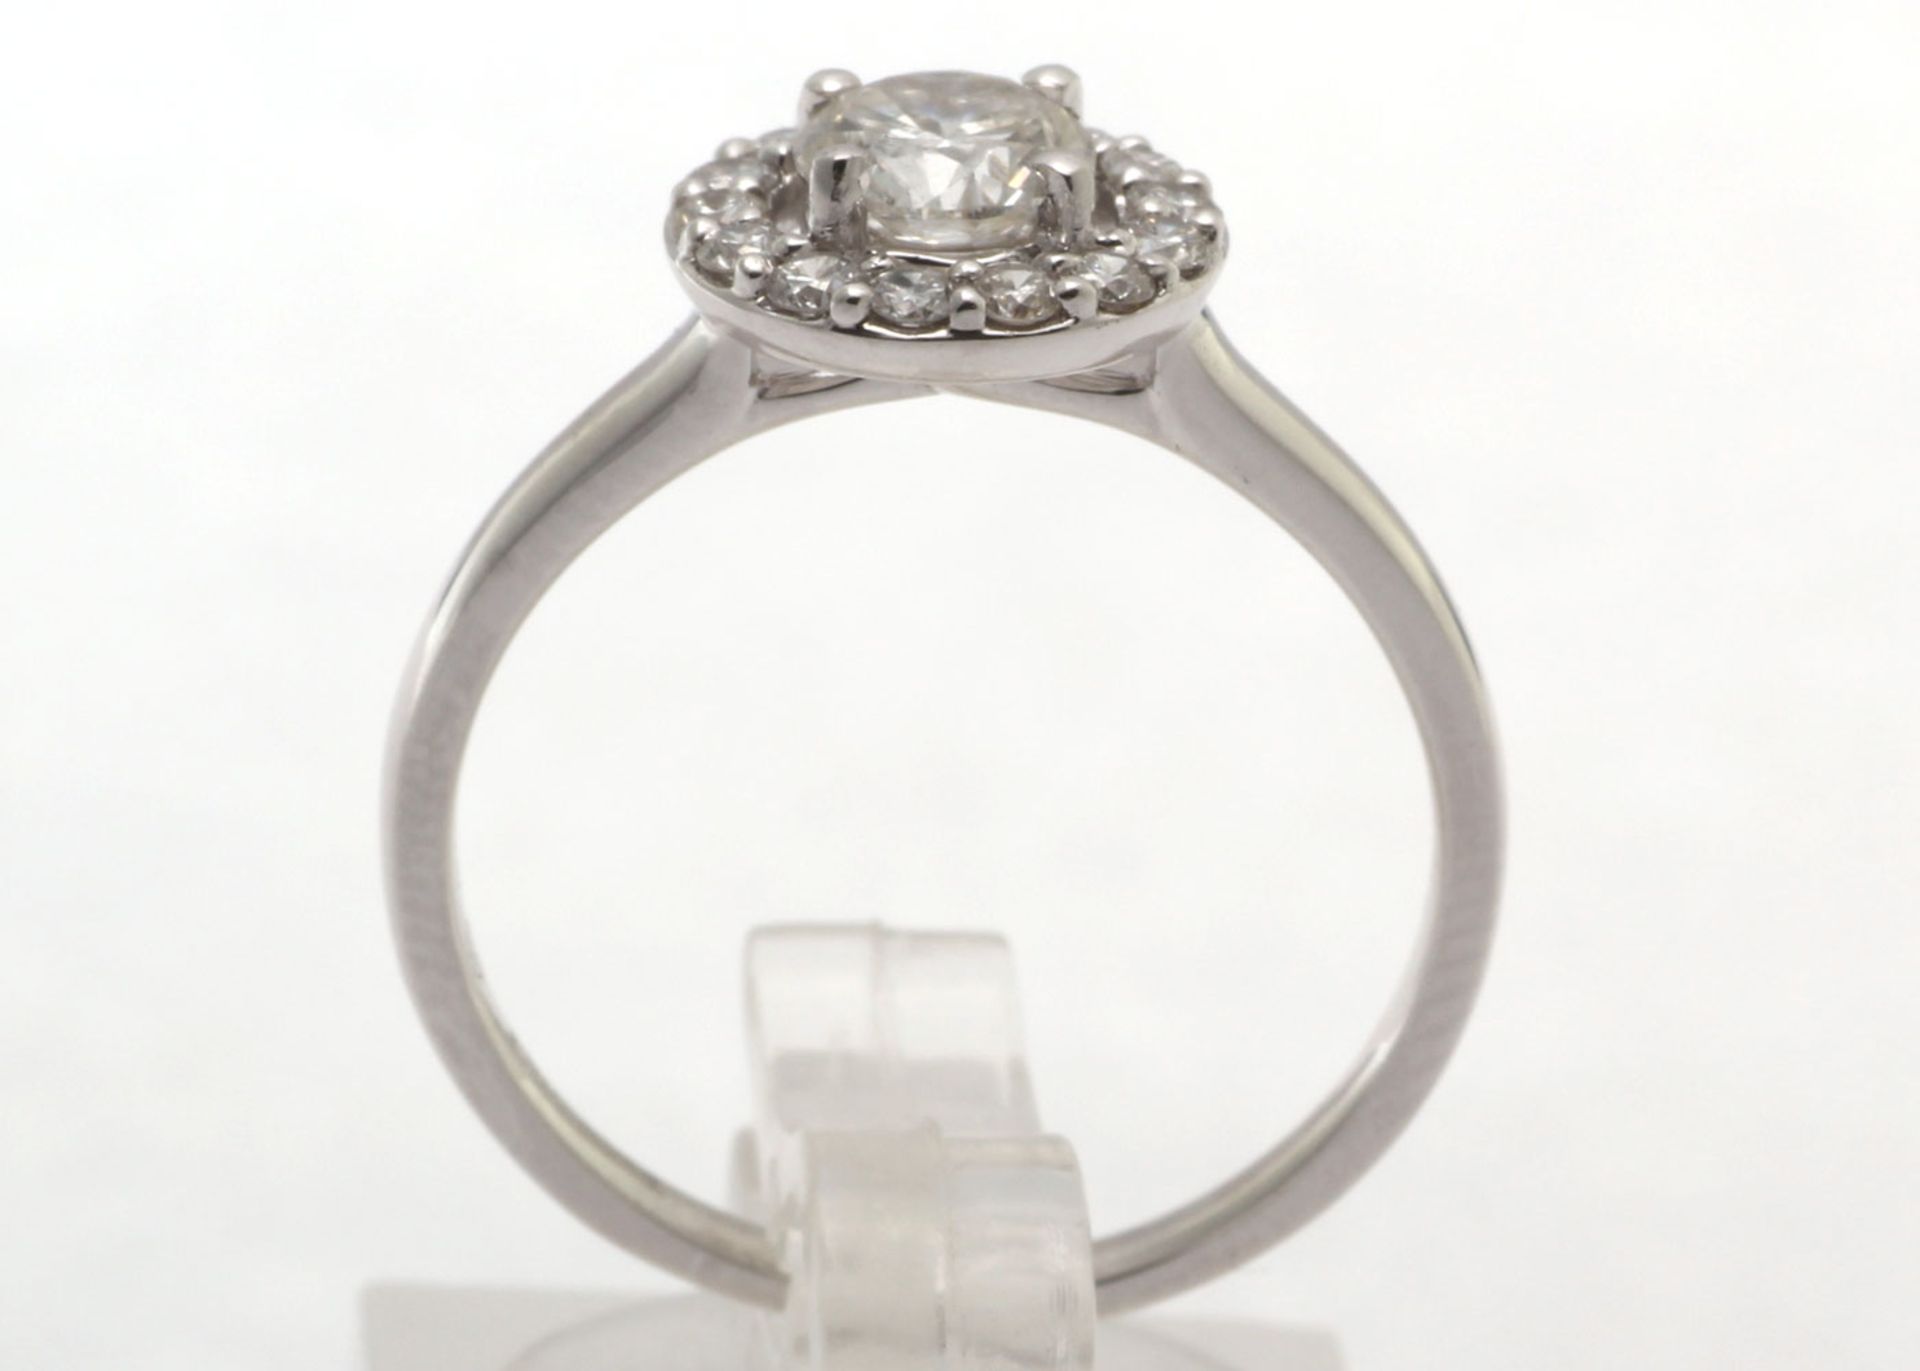 18ct White Gold Single Stone With Halo Setting Ring (0.58) 0.86 Carats - Image 6 of 9